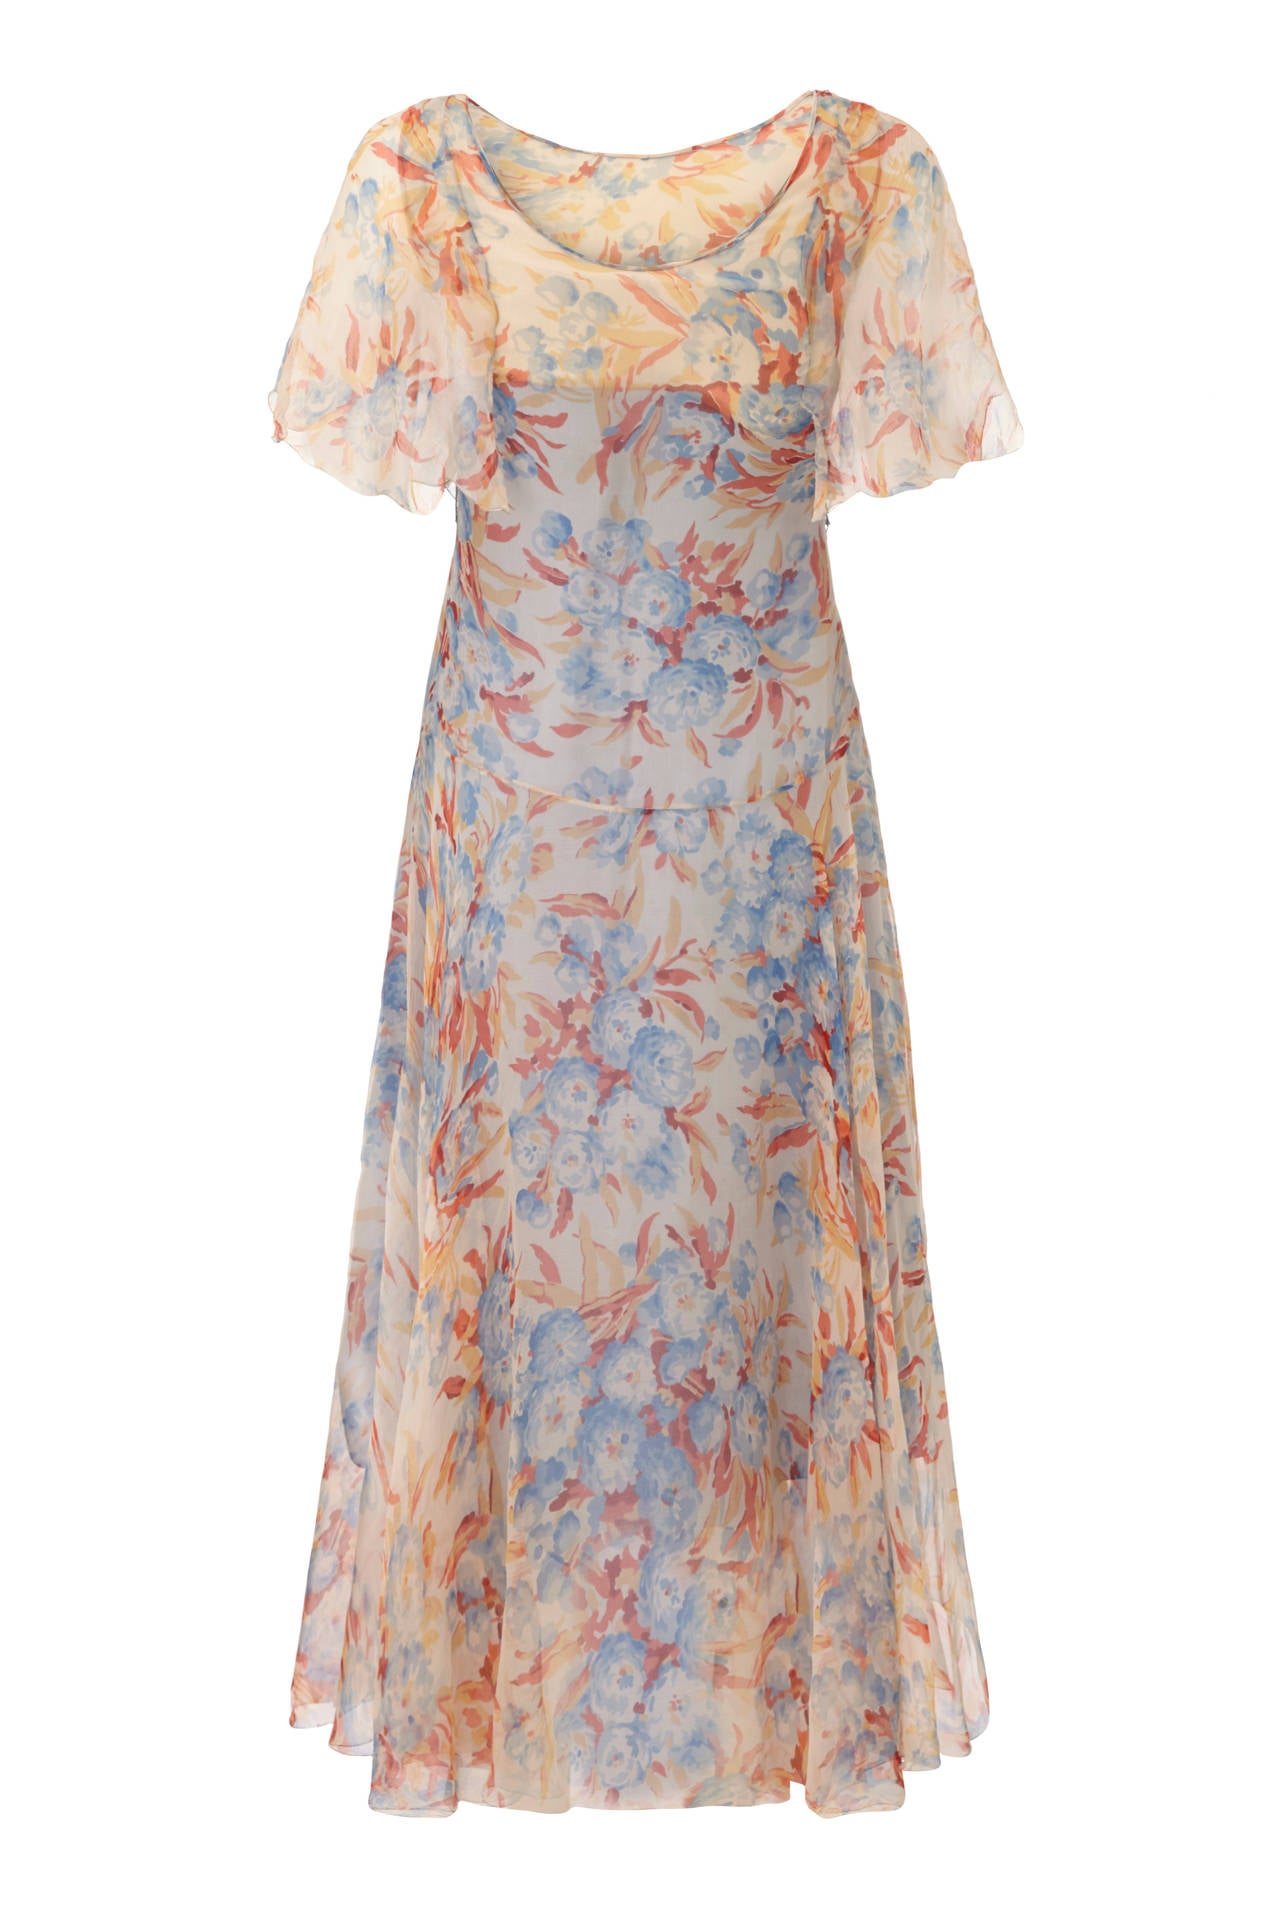 This enchanting 1920s silk chiffon floral print dress is delightfully feminine and in absolutely beautiful condition for a piece of this era. The dress has a scoop neck at both front and reverse , and features cape style sleeves with scalloped edge